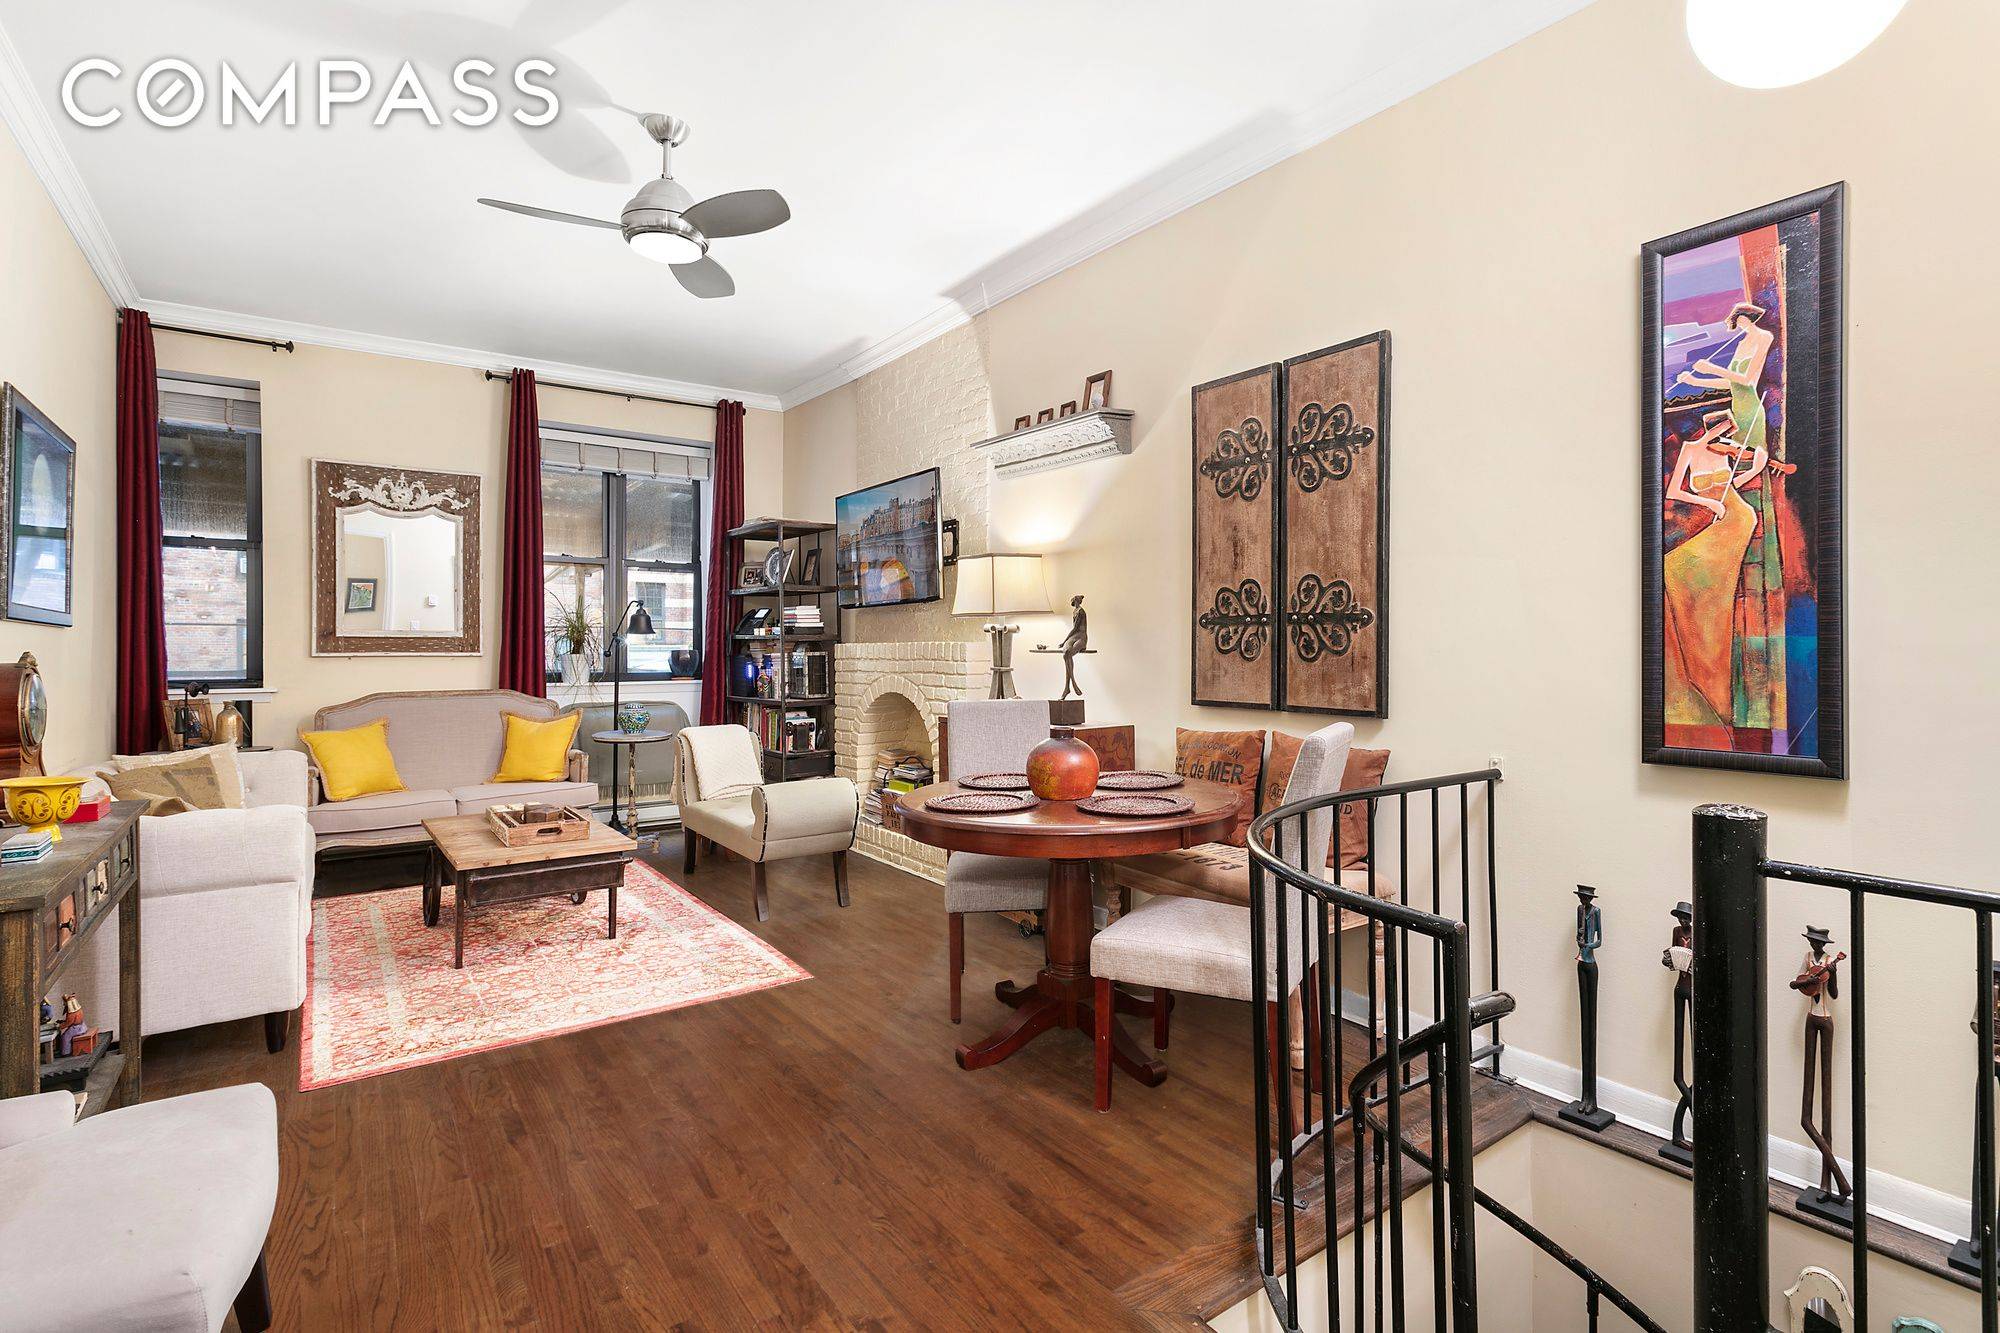 This spacious two bedroom two bathroom duplex apartment on a beautiful block lined with trees and townhouses is the perfect place to call home in West Chelsea.